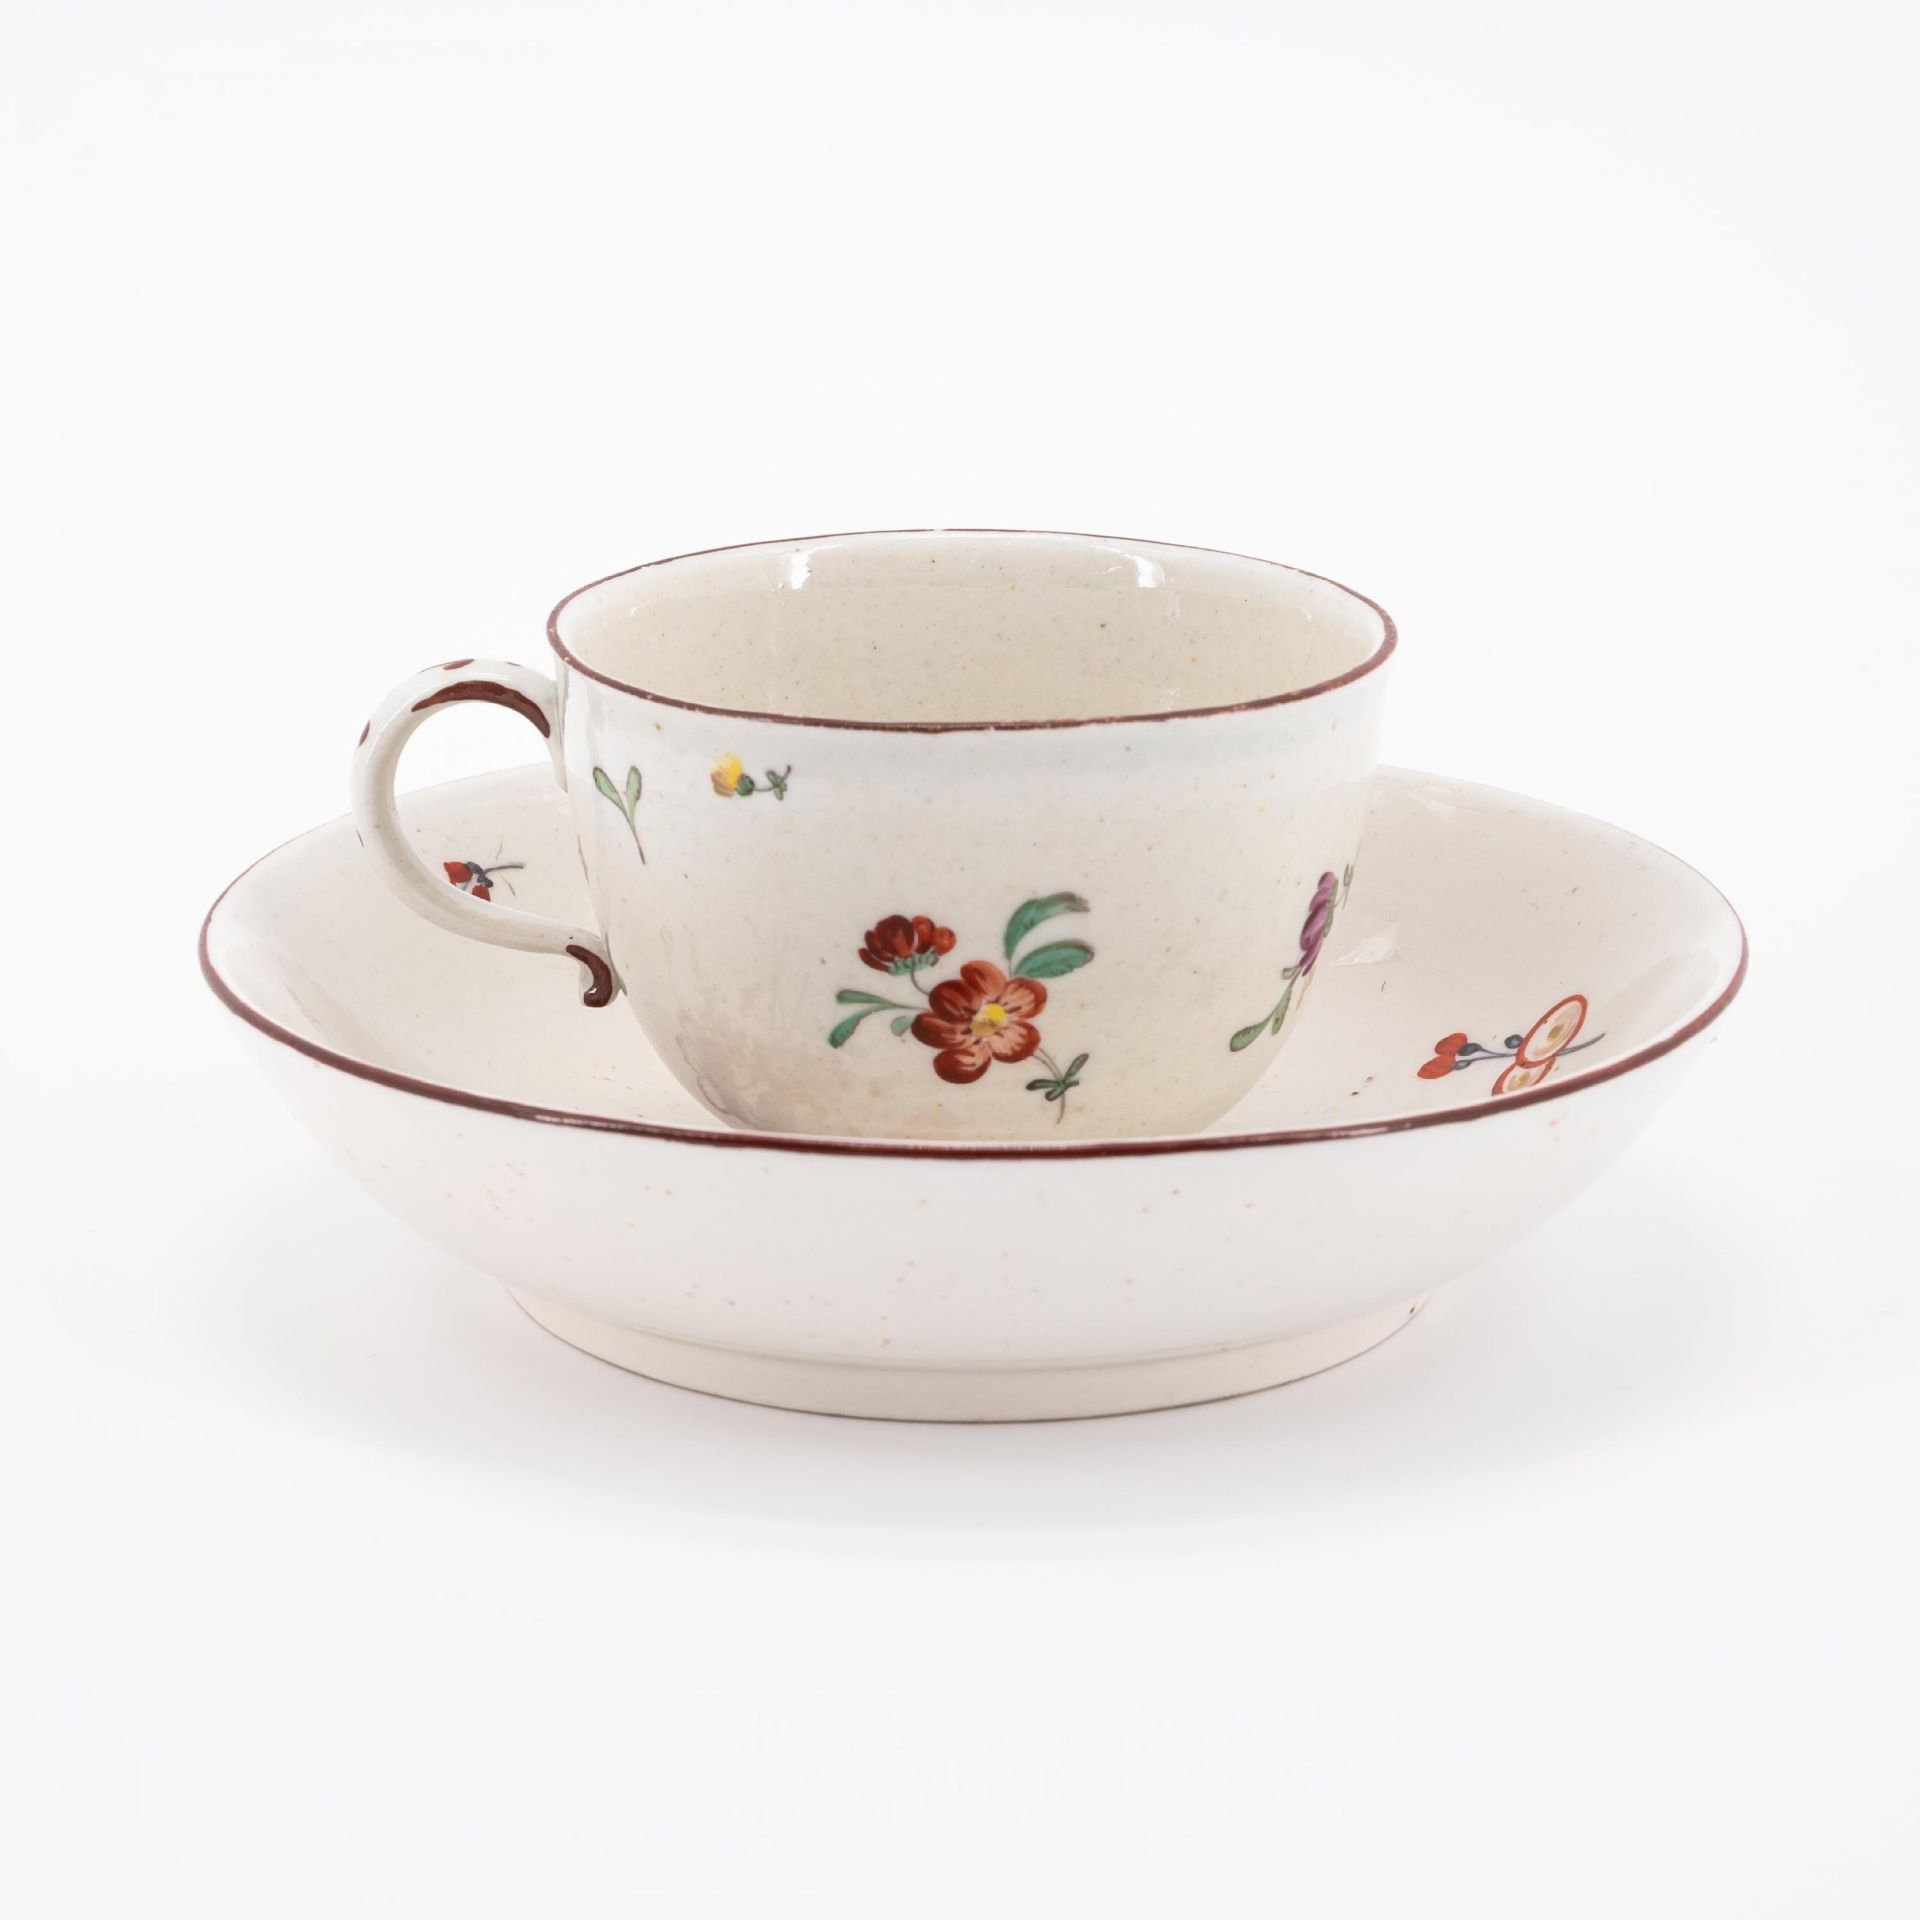 SIX PORCELAIN CUPS AND THREE SAUCERS WITH BIRD DECOR, FLOWERS AND LANDSCAPE SCENES - Image 14 of 16